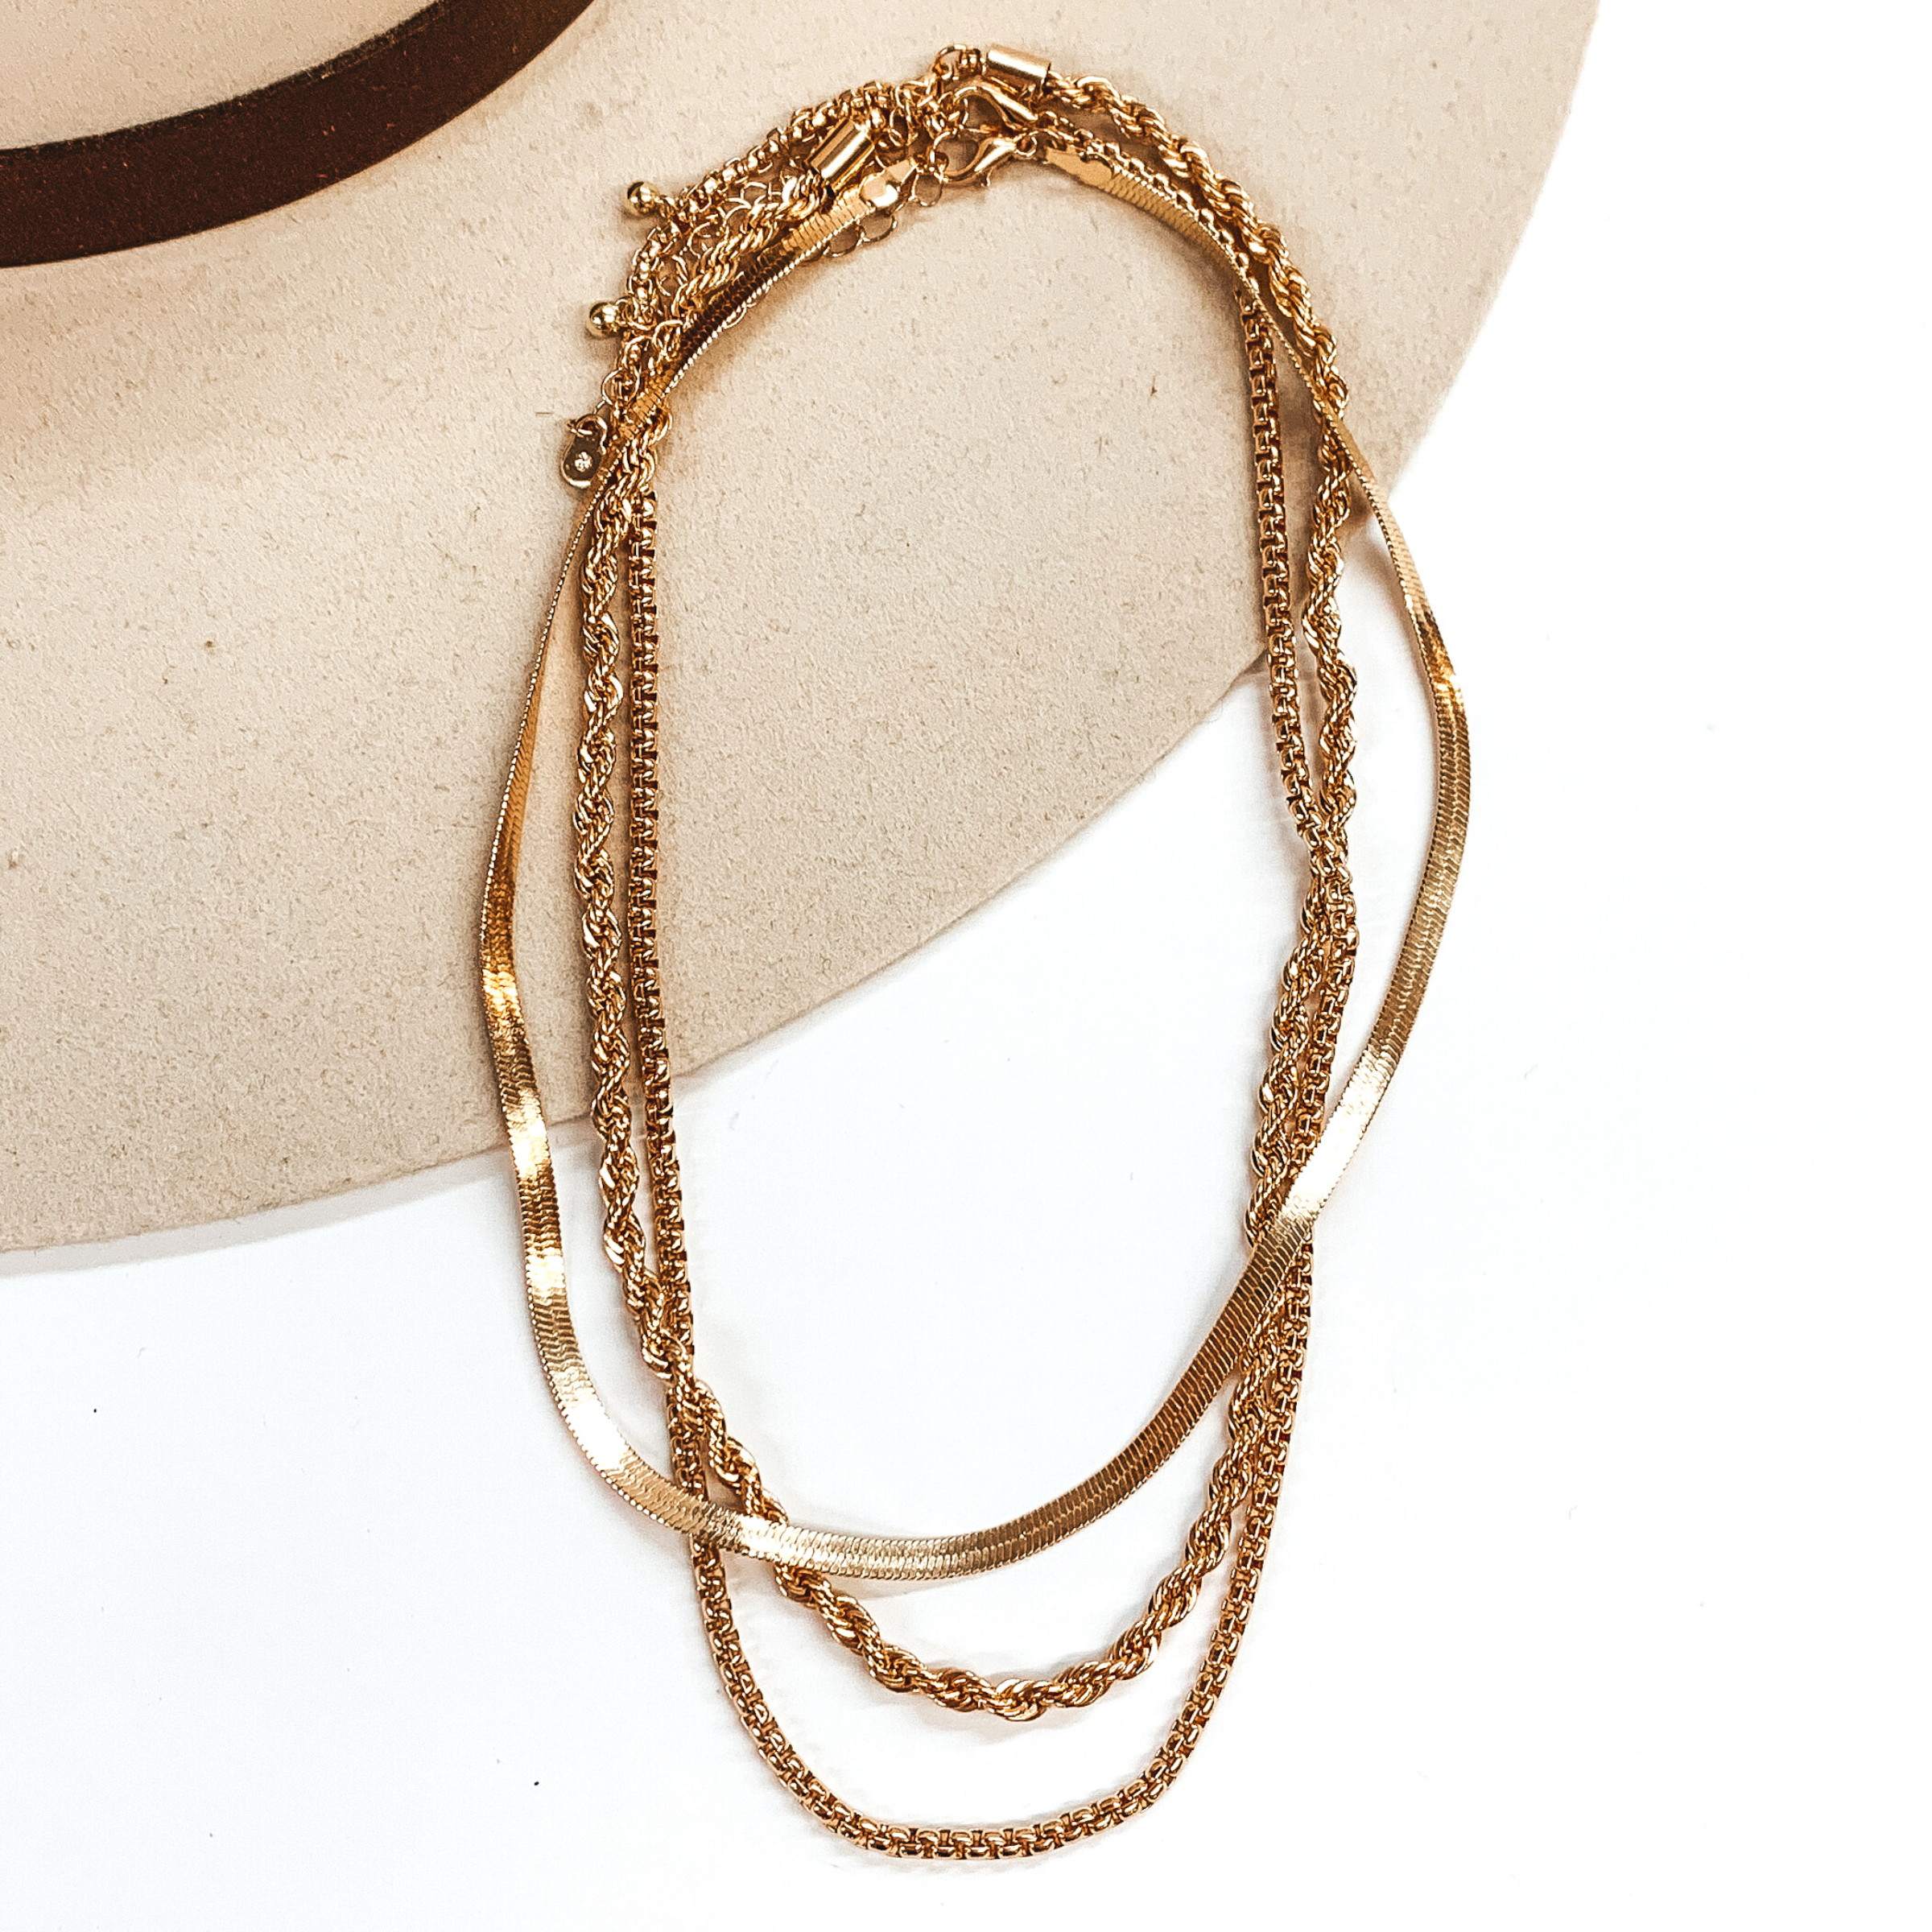 This set of gold necklace include a snake chain, a rope chain, and a box chain necklace. Each necklace has a different length. These necklaces are pictured partially laying on top of a beige hat brim on a white background.